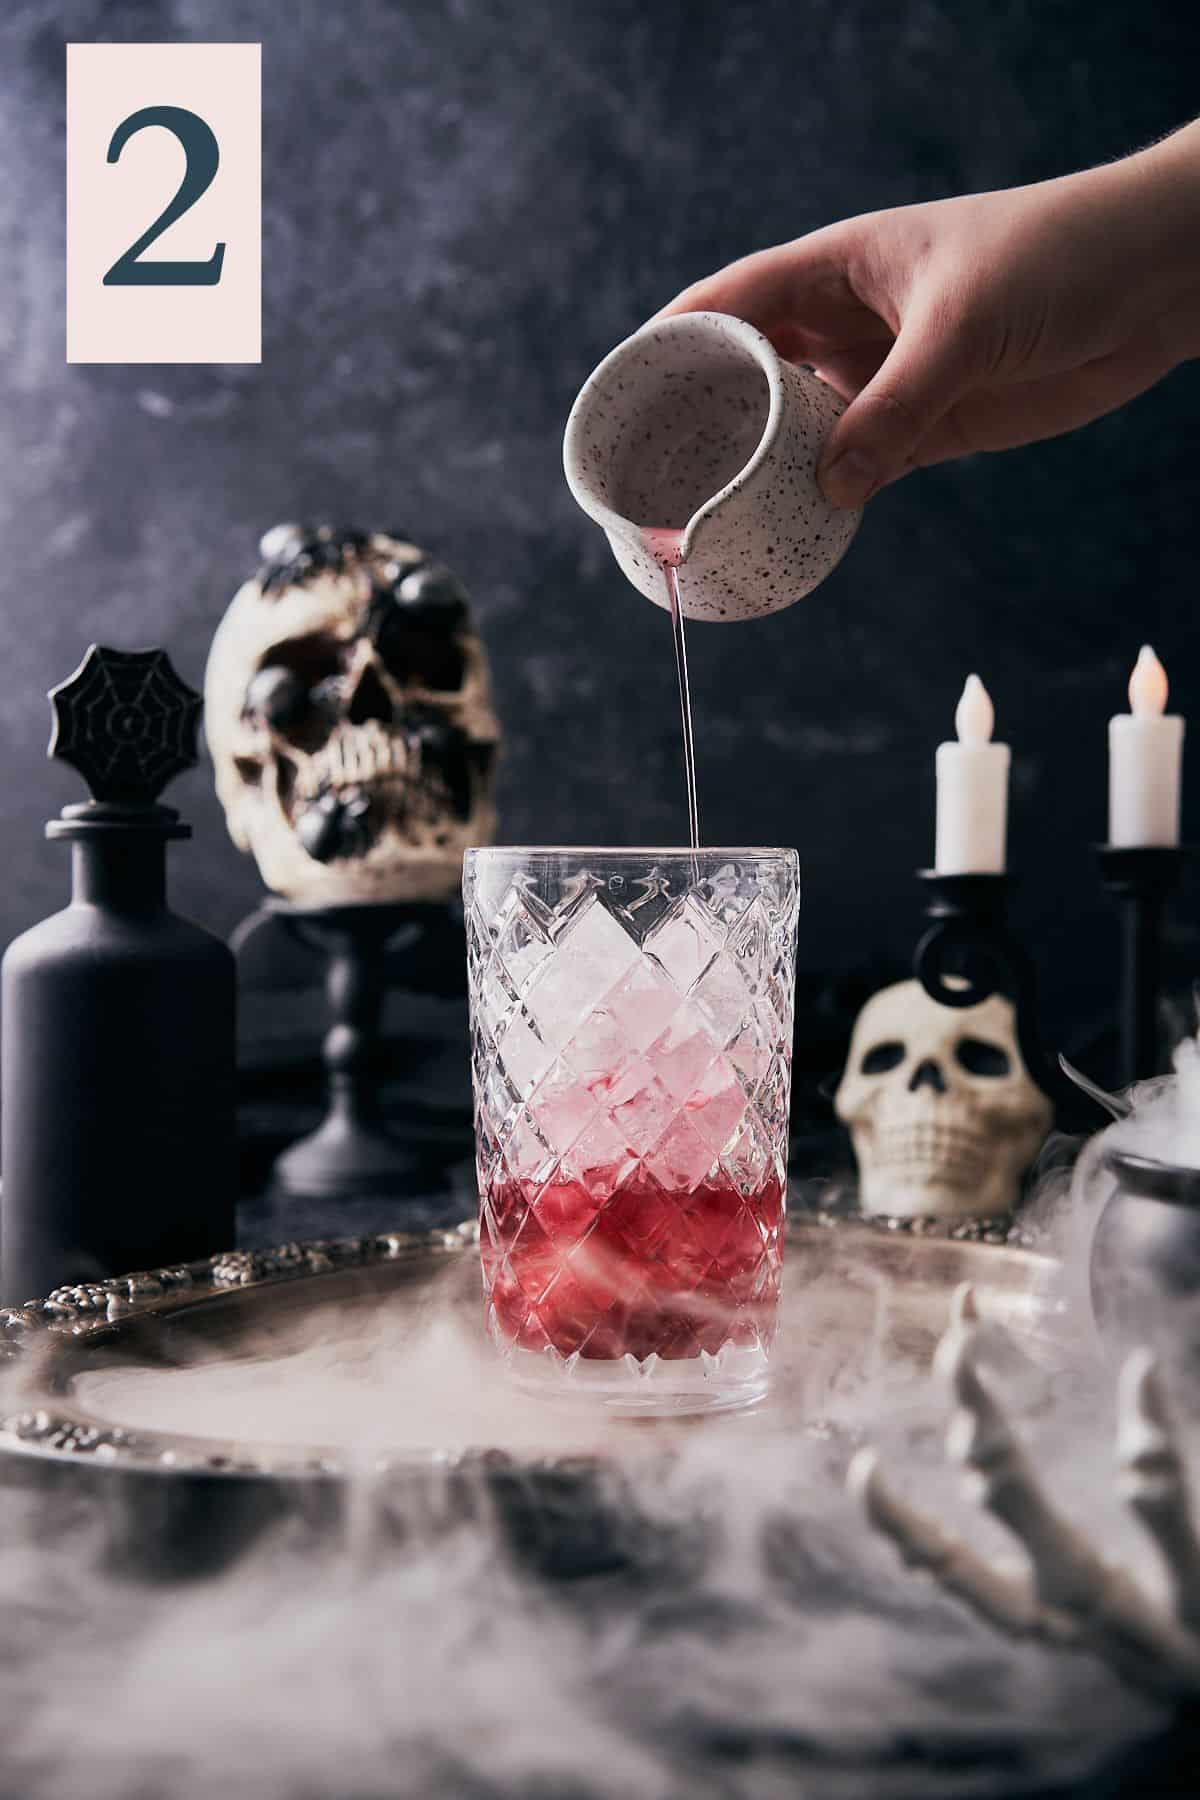 spooky halloween scene with dry ice, and skulls with a hand pouring a red juice into an ice filled cocktail shaker.